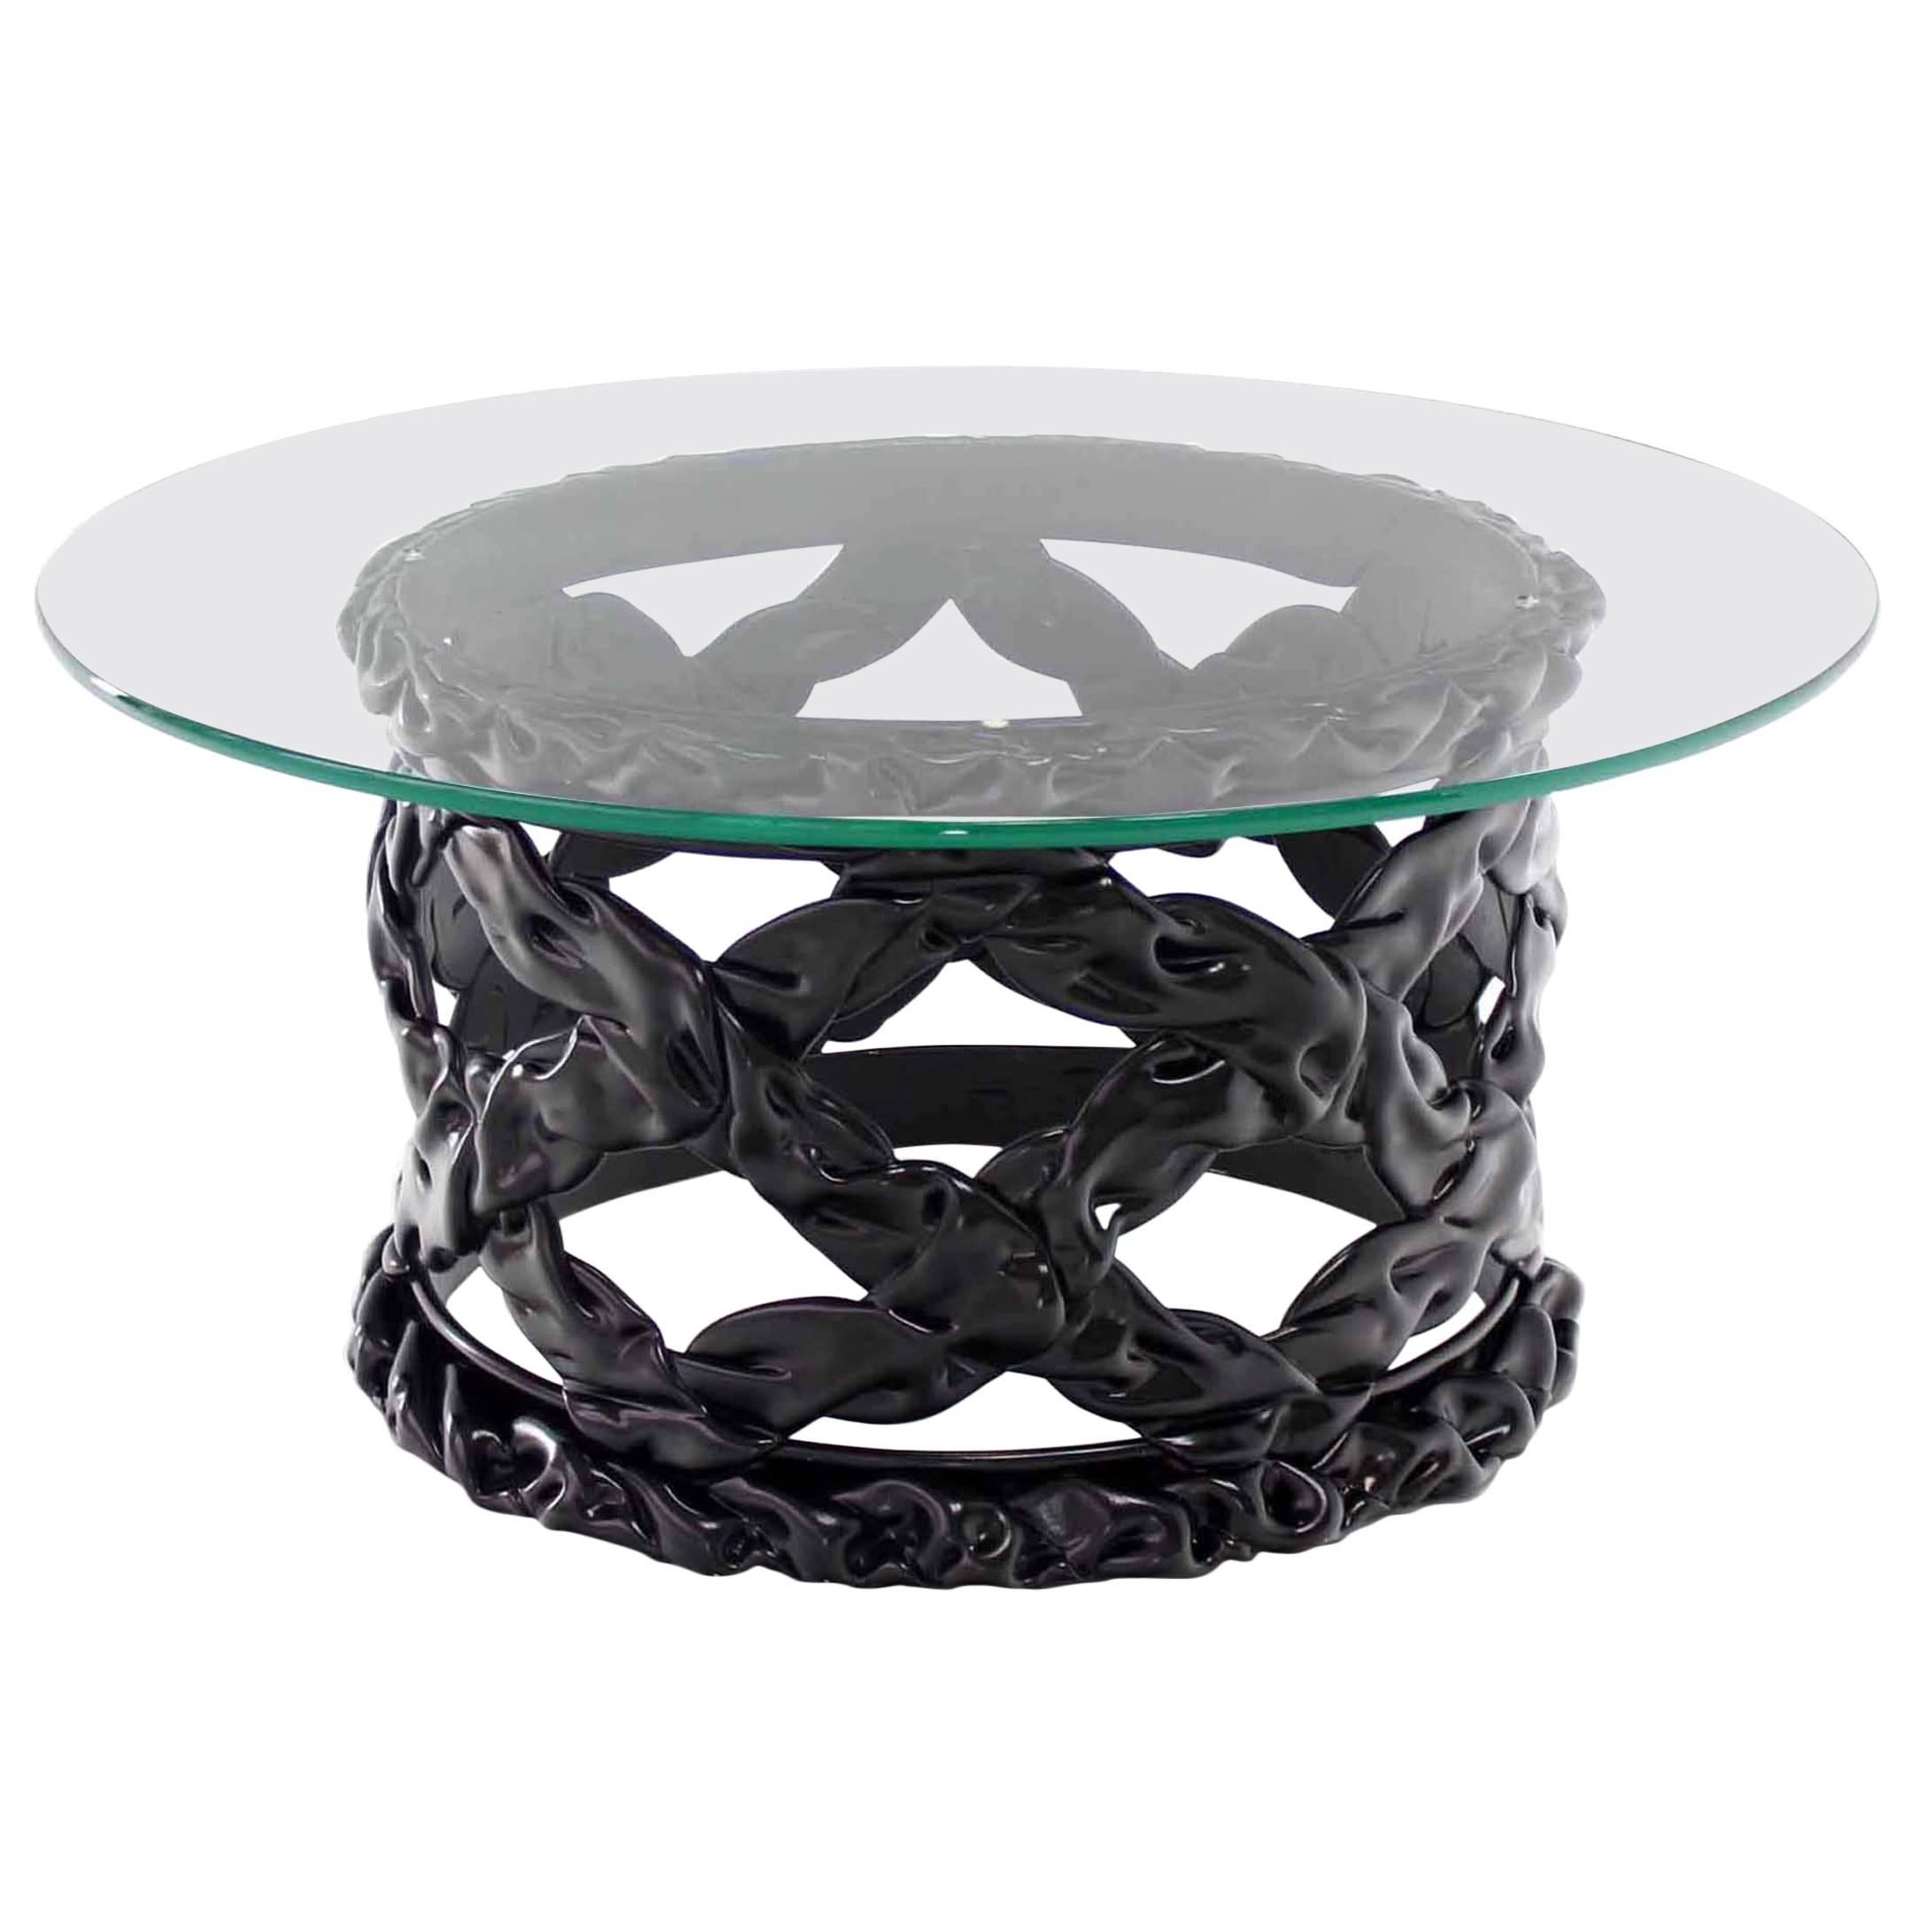 Black Lacquer Spaghetti Style Mid-Century Modern Round Glass Top Coffee Table For Sale